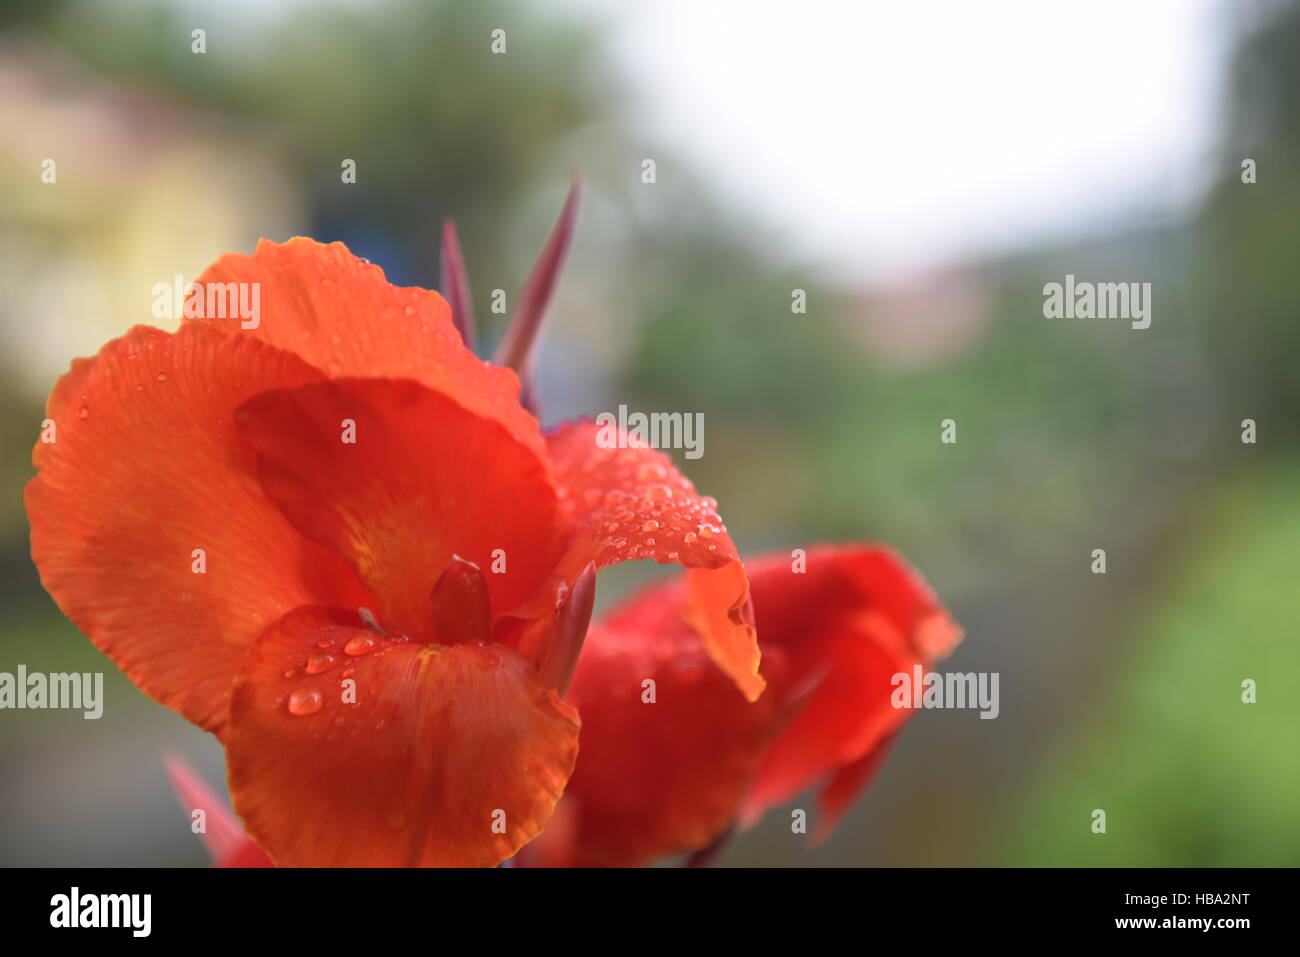 Canna lily, although not a true lily. Indian flower plant footage taken in rainy days Stock Photo